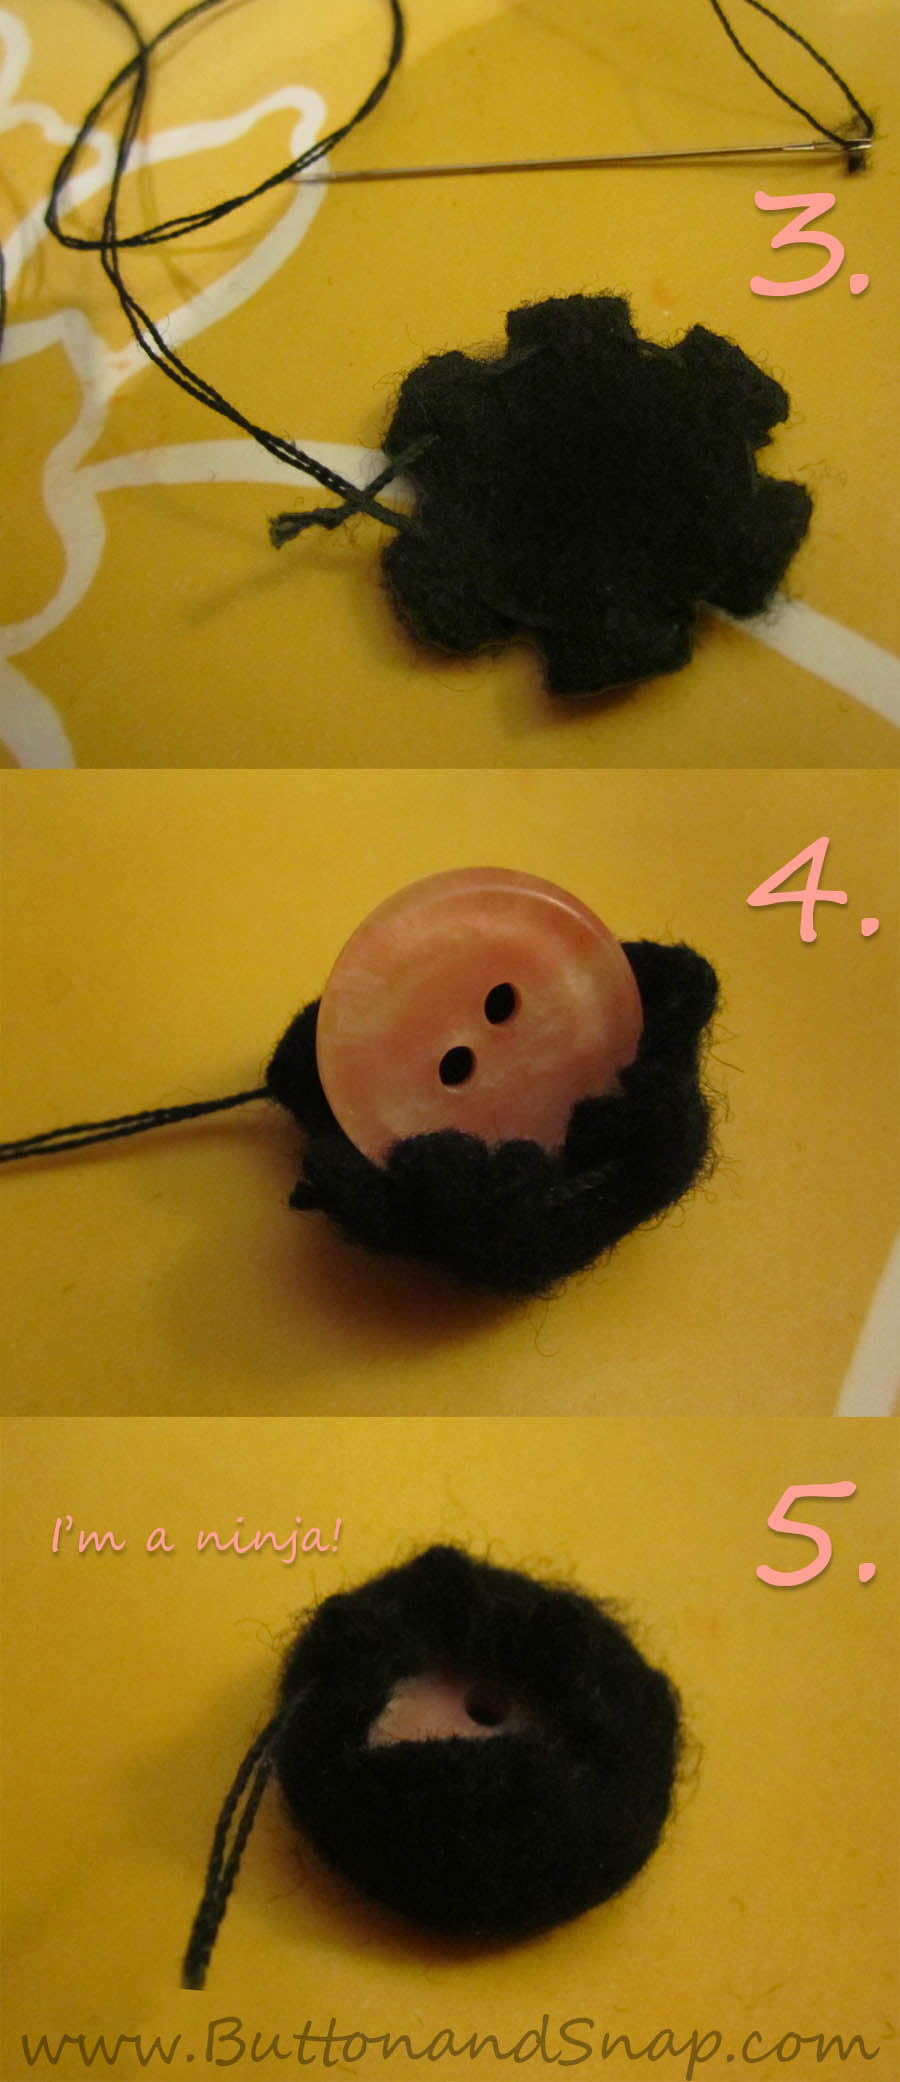 Recycling old buttons by hand-covering them in wool felt